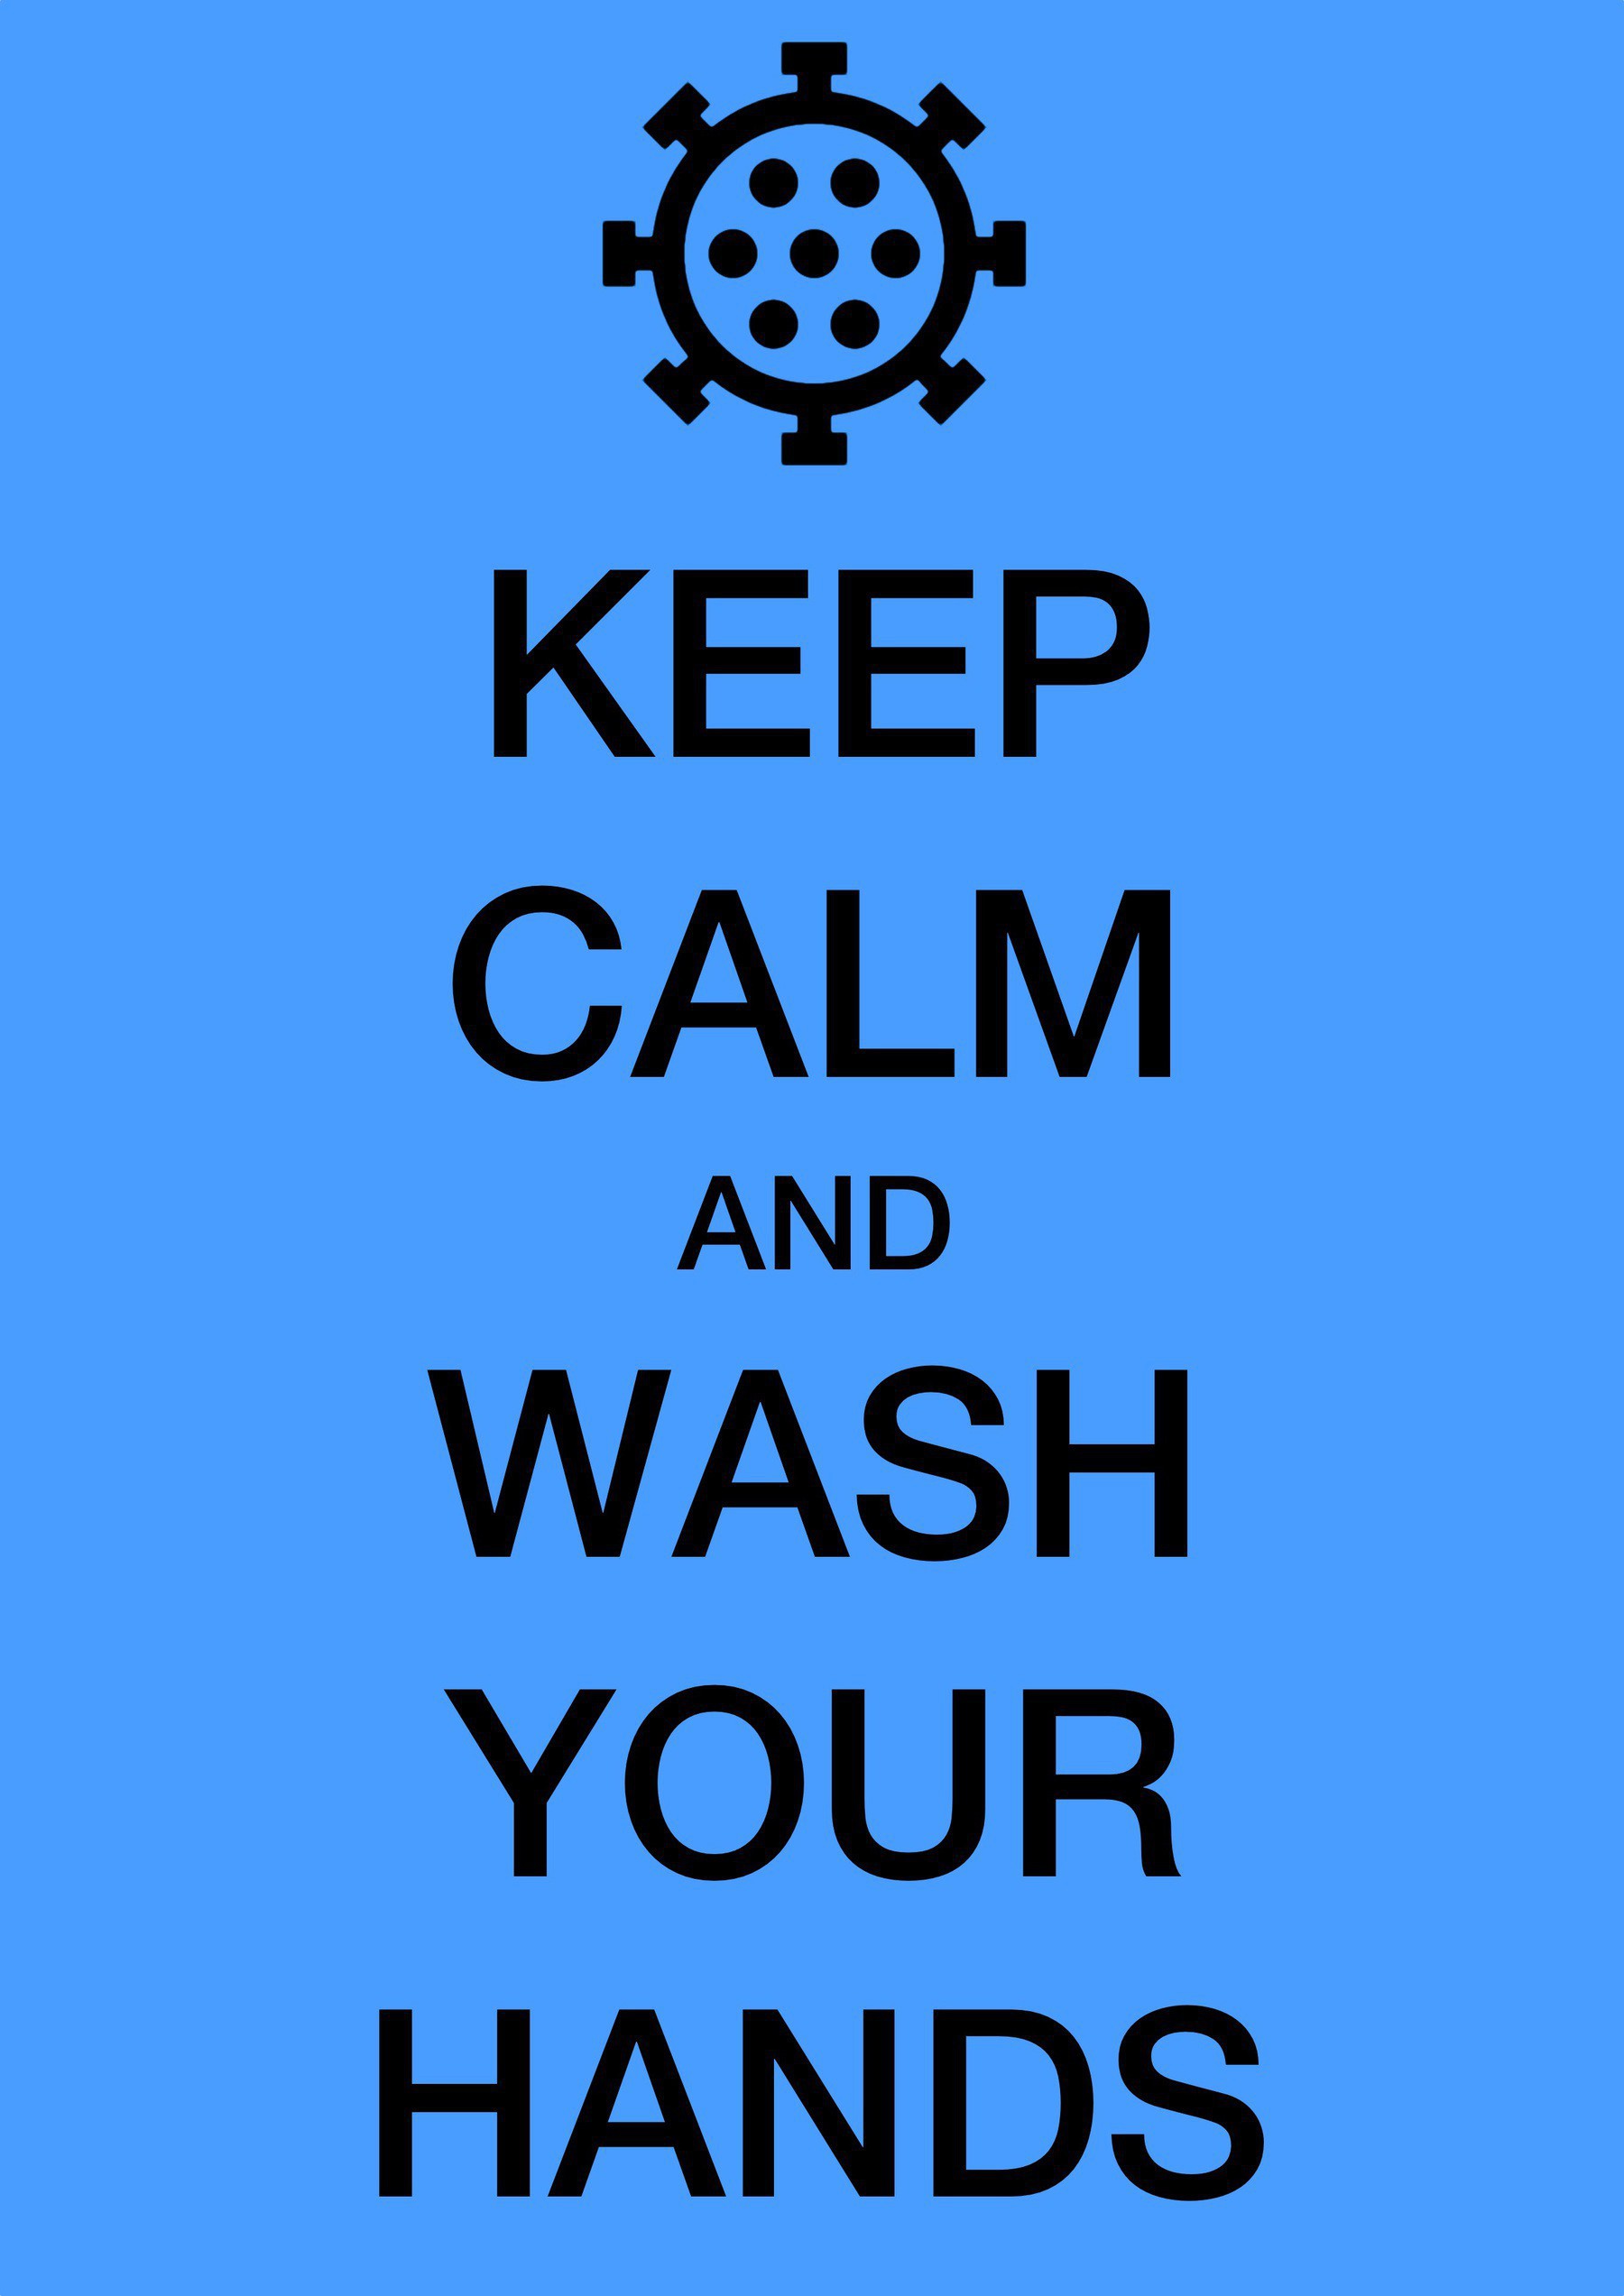 A poster in the style of the Keep Calm and Carry On posters of the second world war, but with a Carona virus on top instead of a crown, ad the word Keep Calm and Wash Your Hands